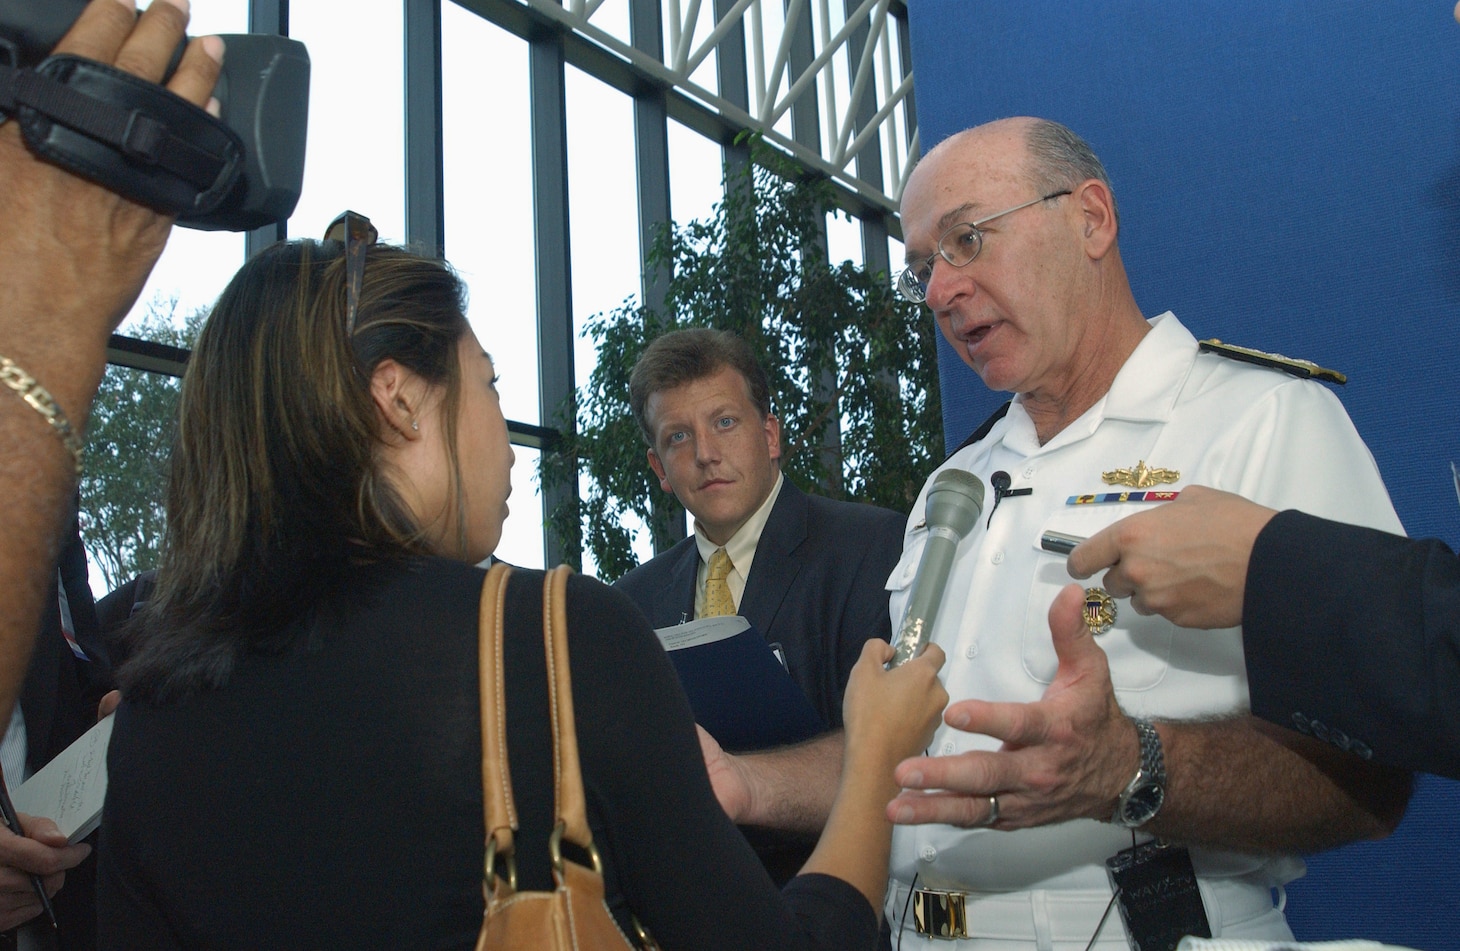 Female reporter holding microphone with cameraman behind her, asking Chief of naval operations questions during an interview